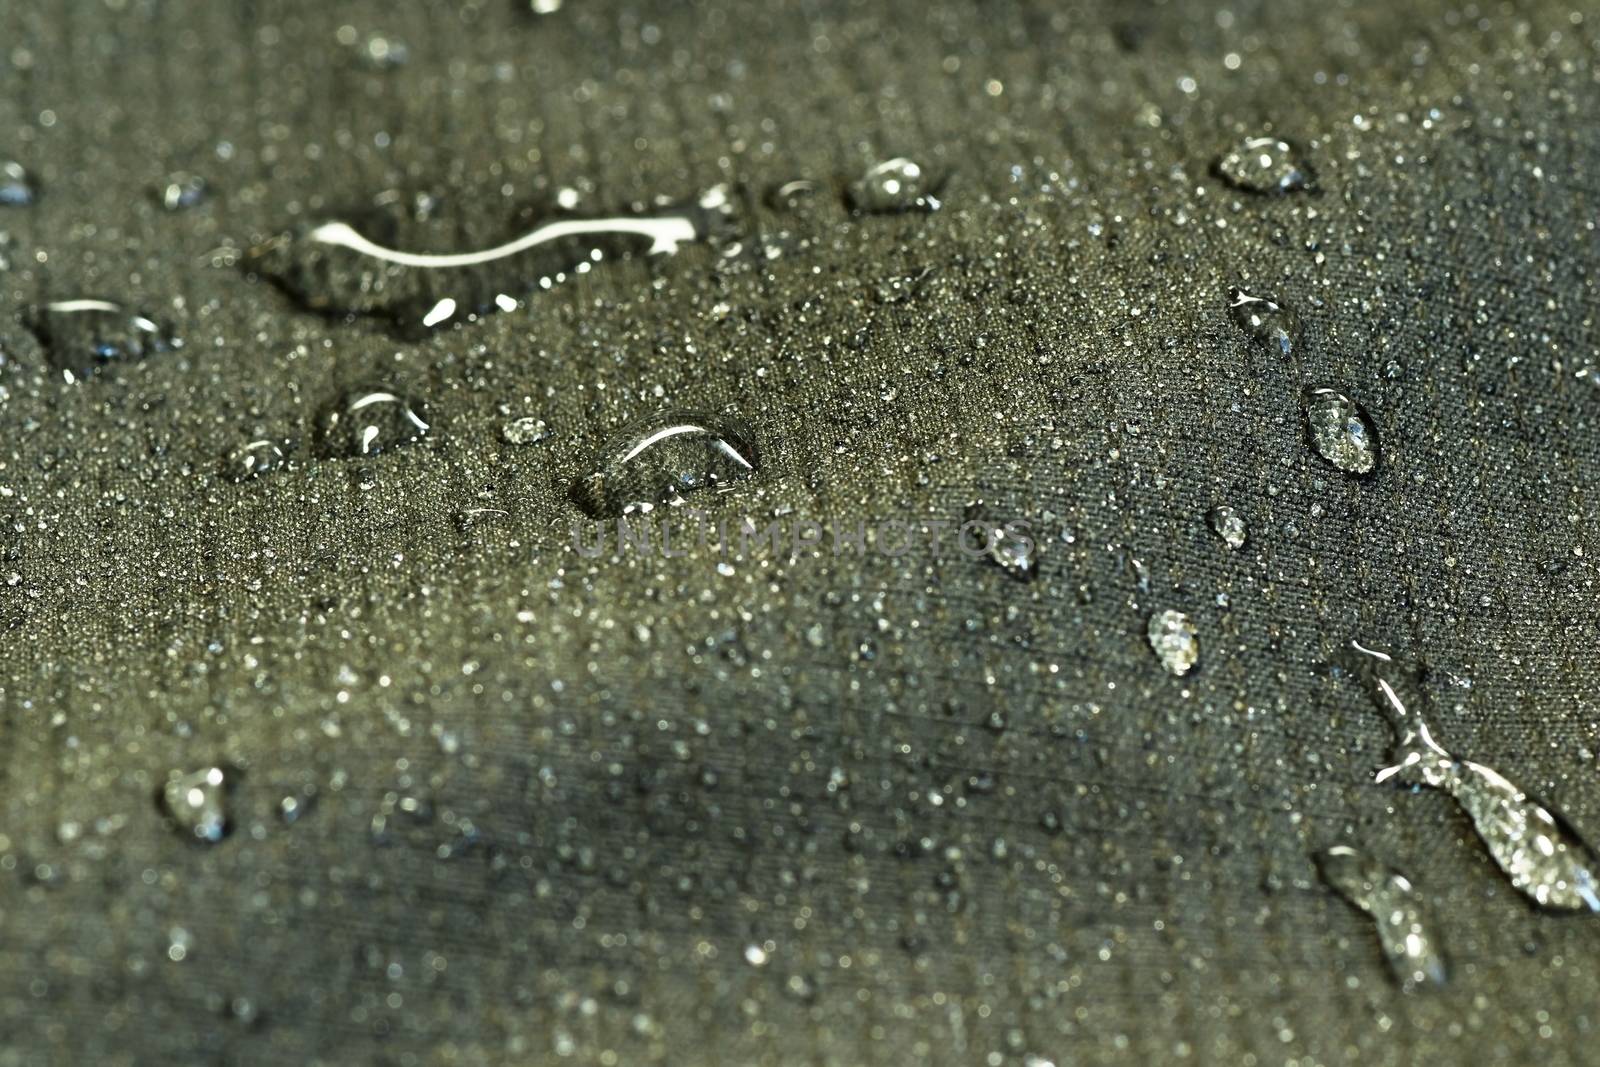 water repellent jacket material by taviphoto